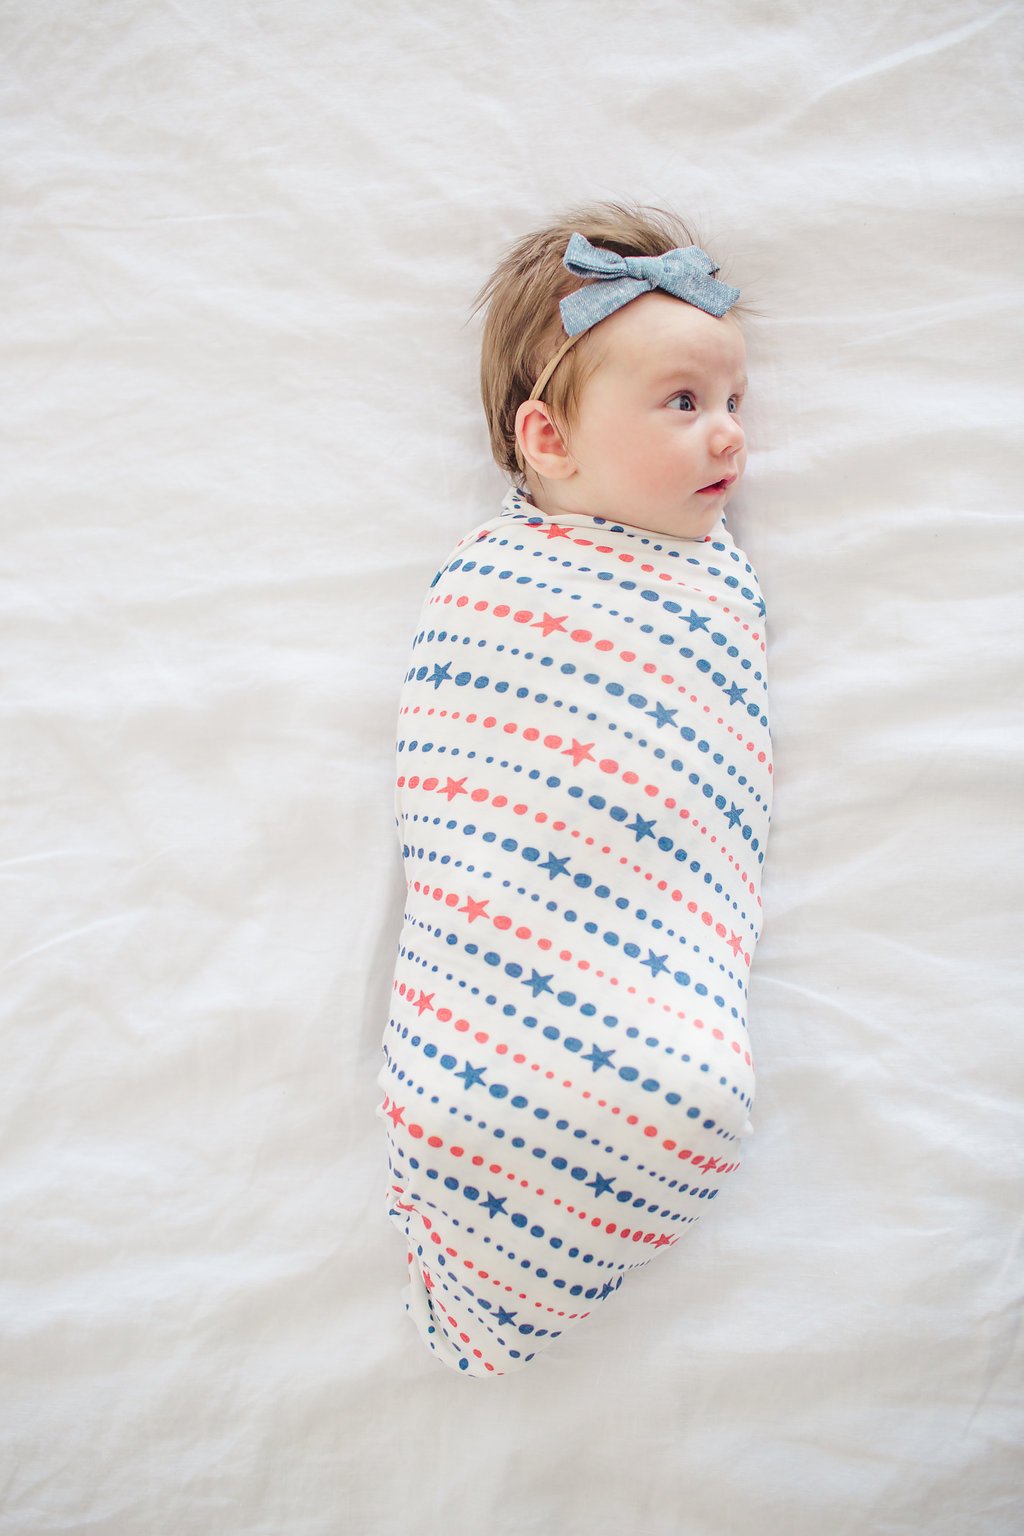 Copper Pearl Knit Swaddle Blanket - Glory